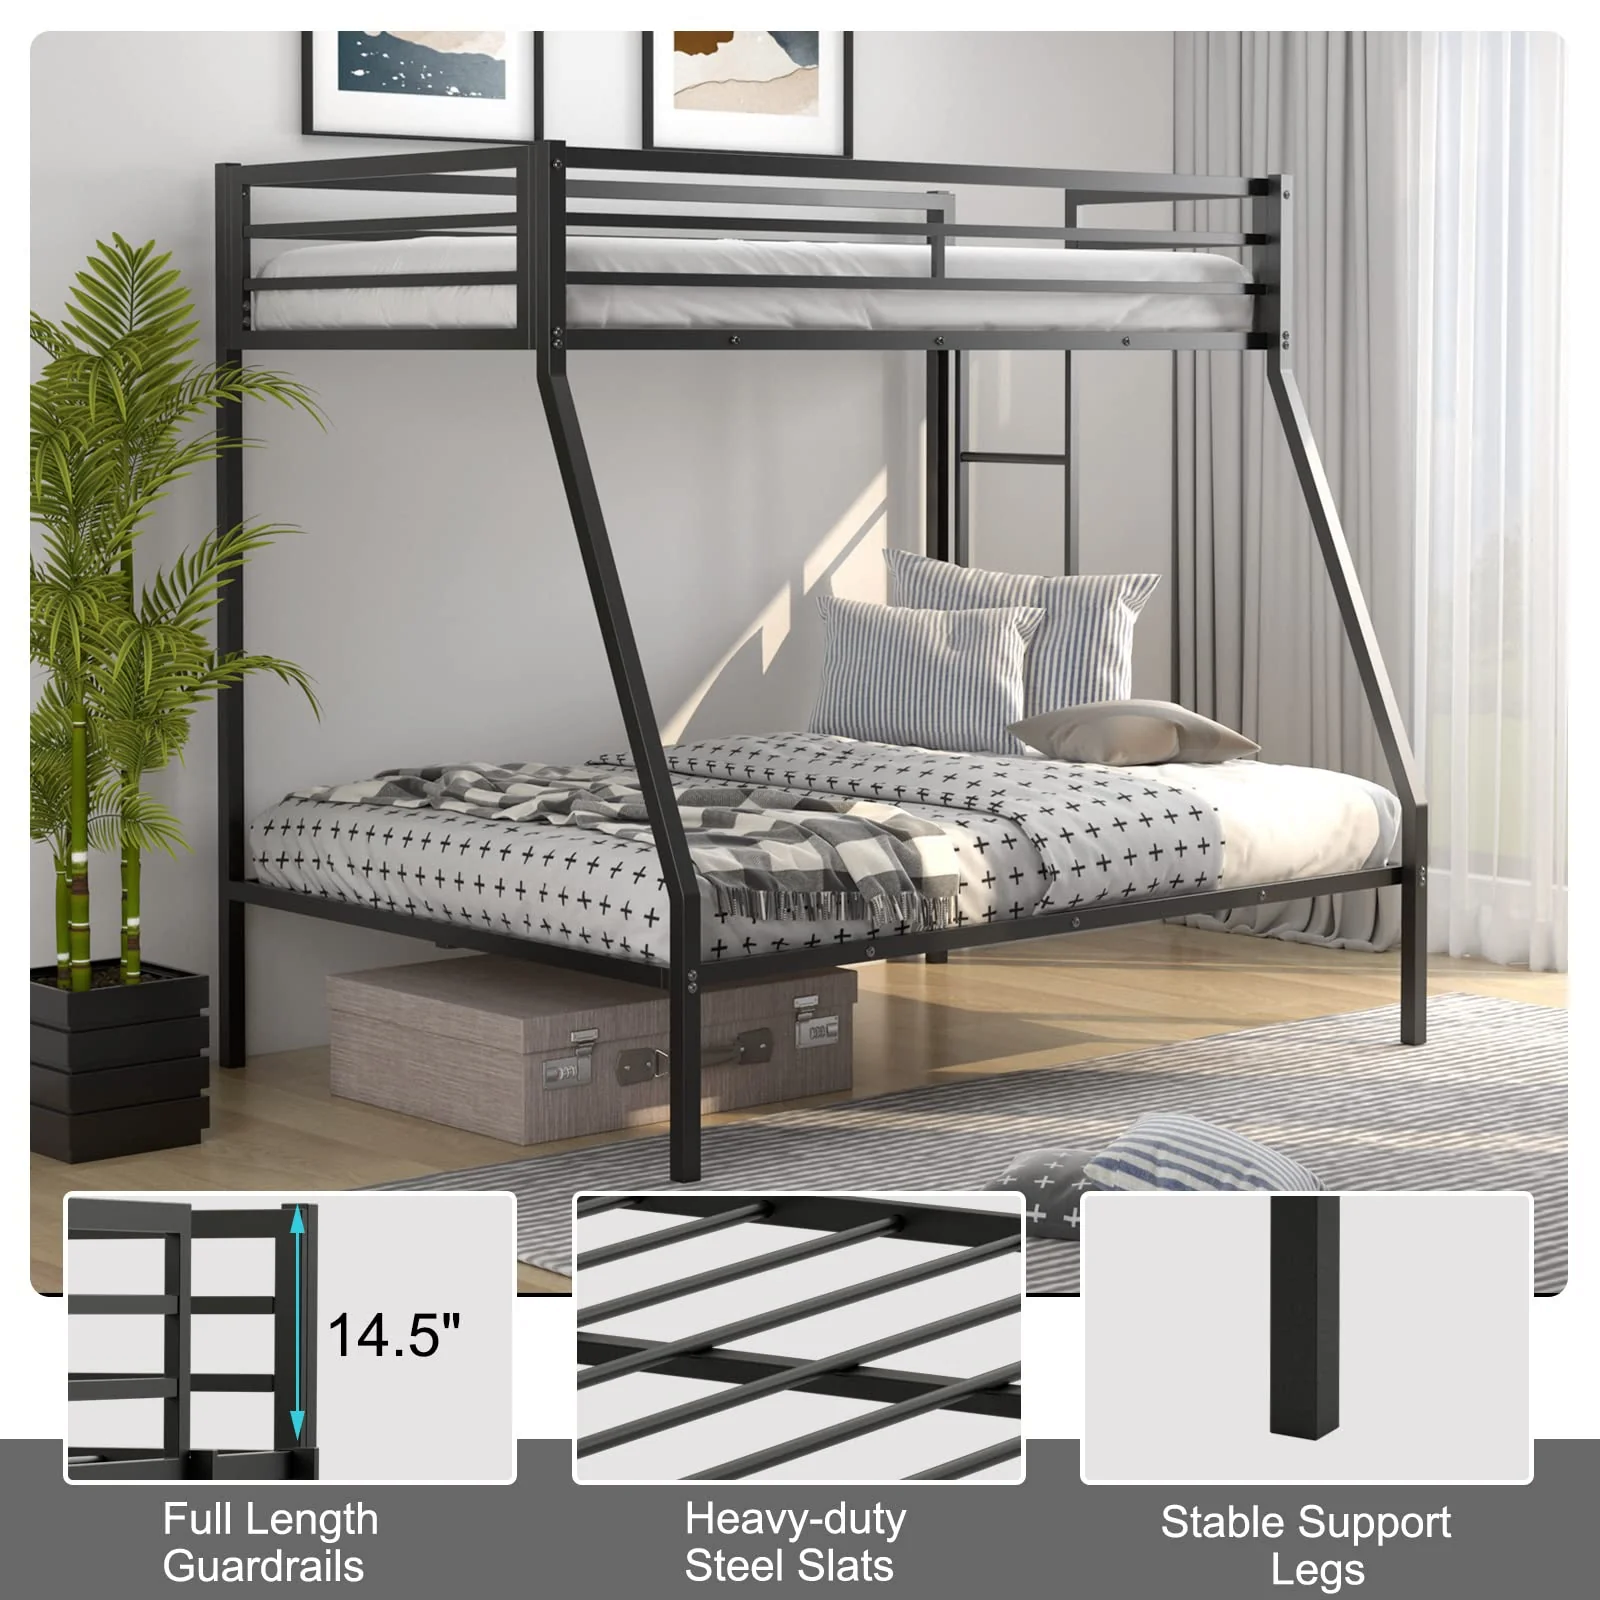 Advantages, Precautions And Maintenance About An Iron Bunk Bed